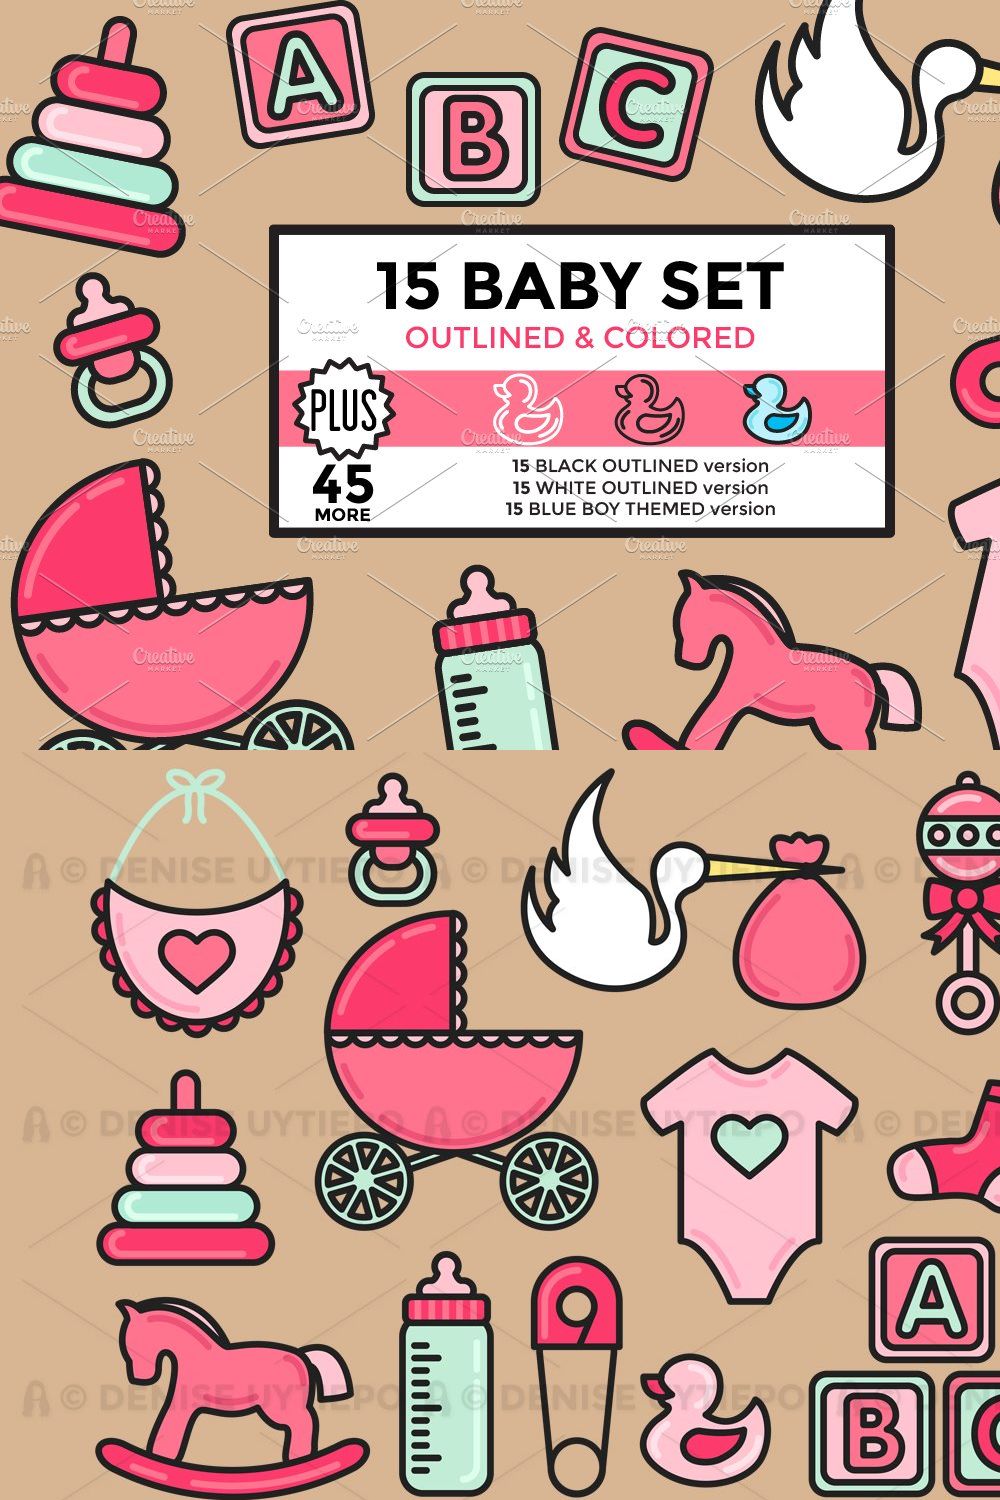 Baby Set Outlined & Colored pinterest preview image.